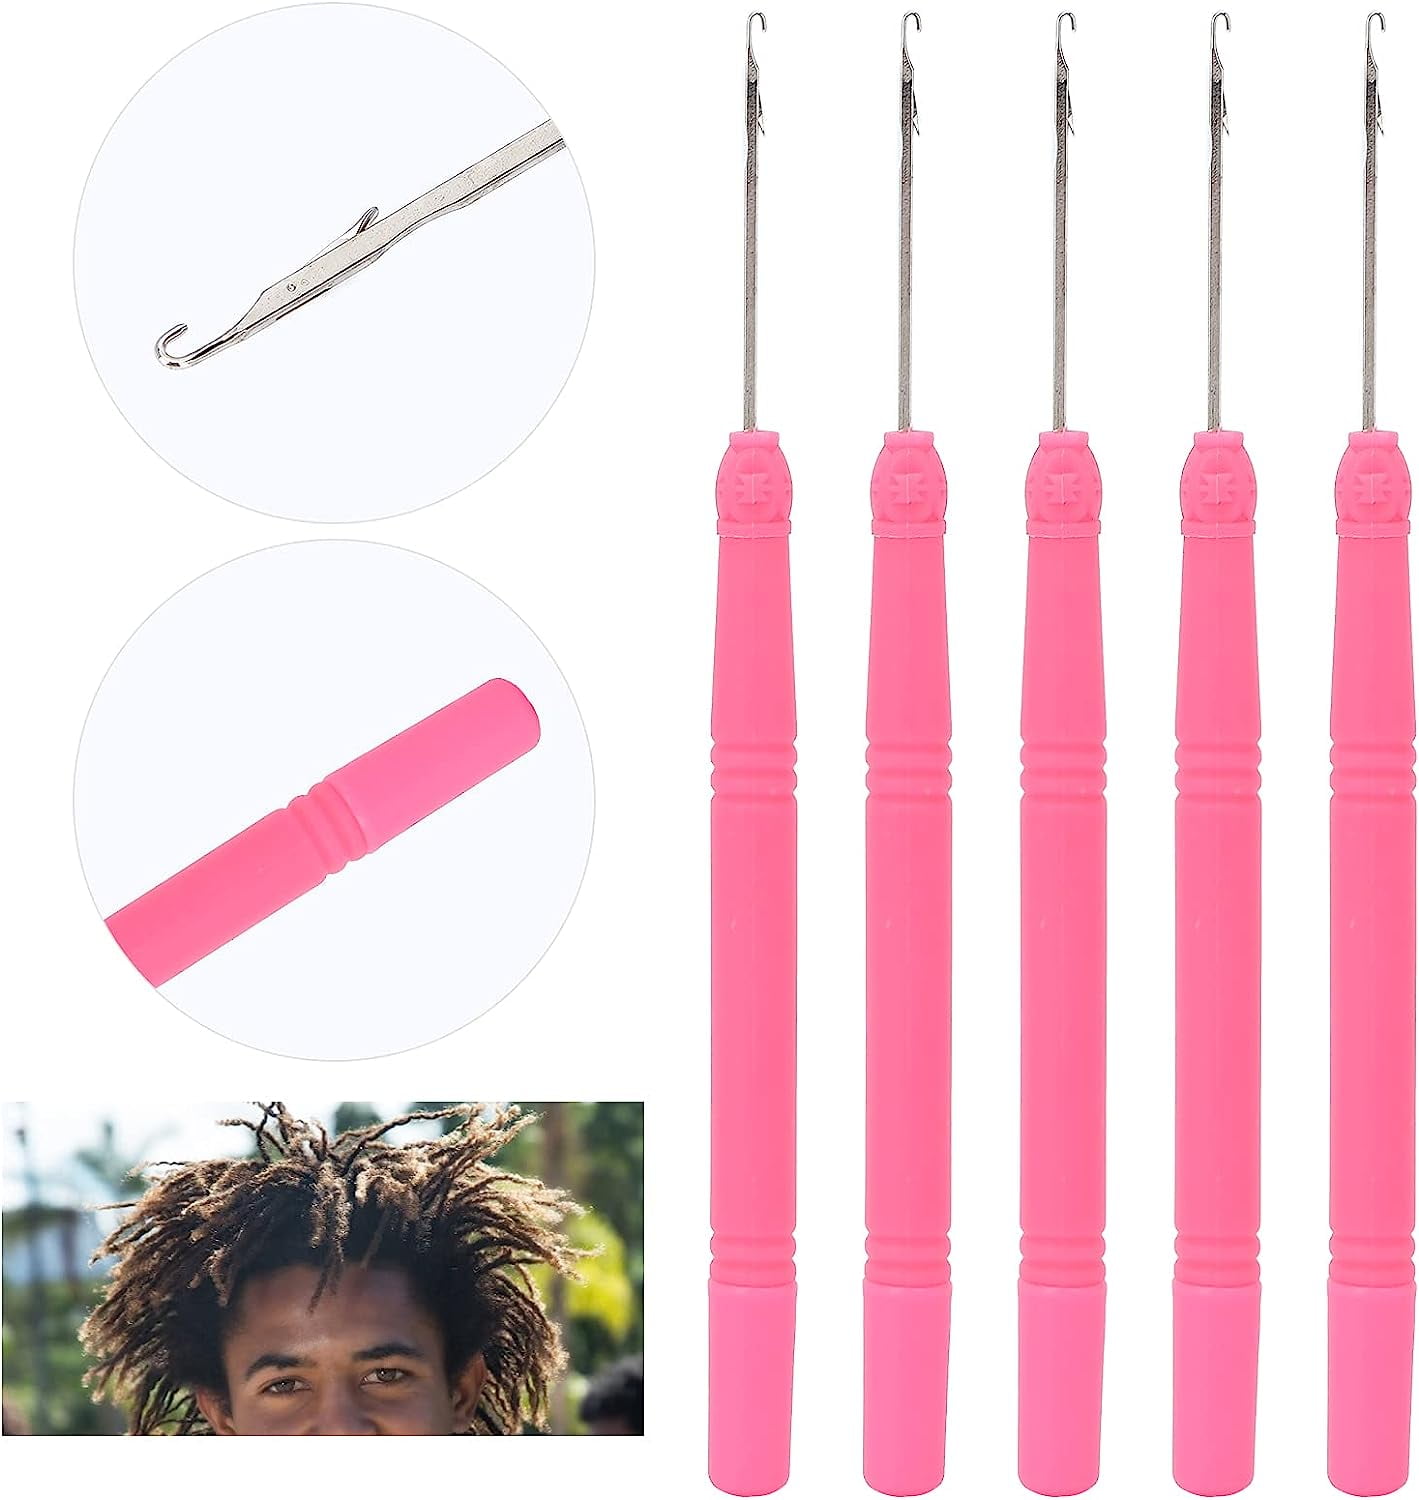 3kinds Leather Craft Crochet Needle Latch Hook Weave Hair Extension Tool  Set